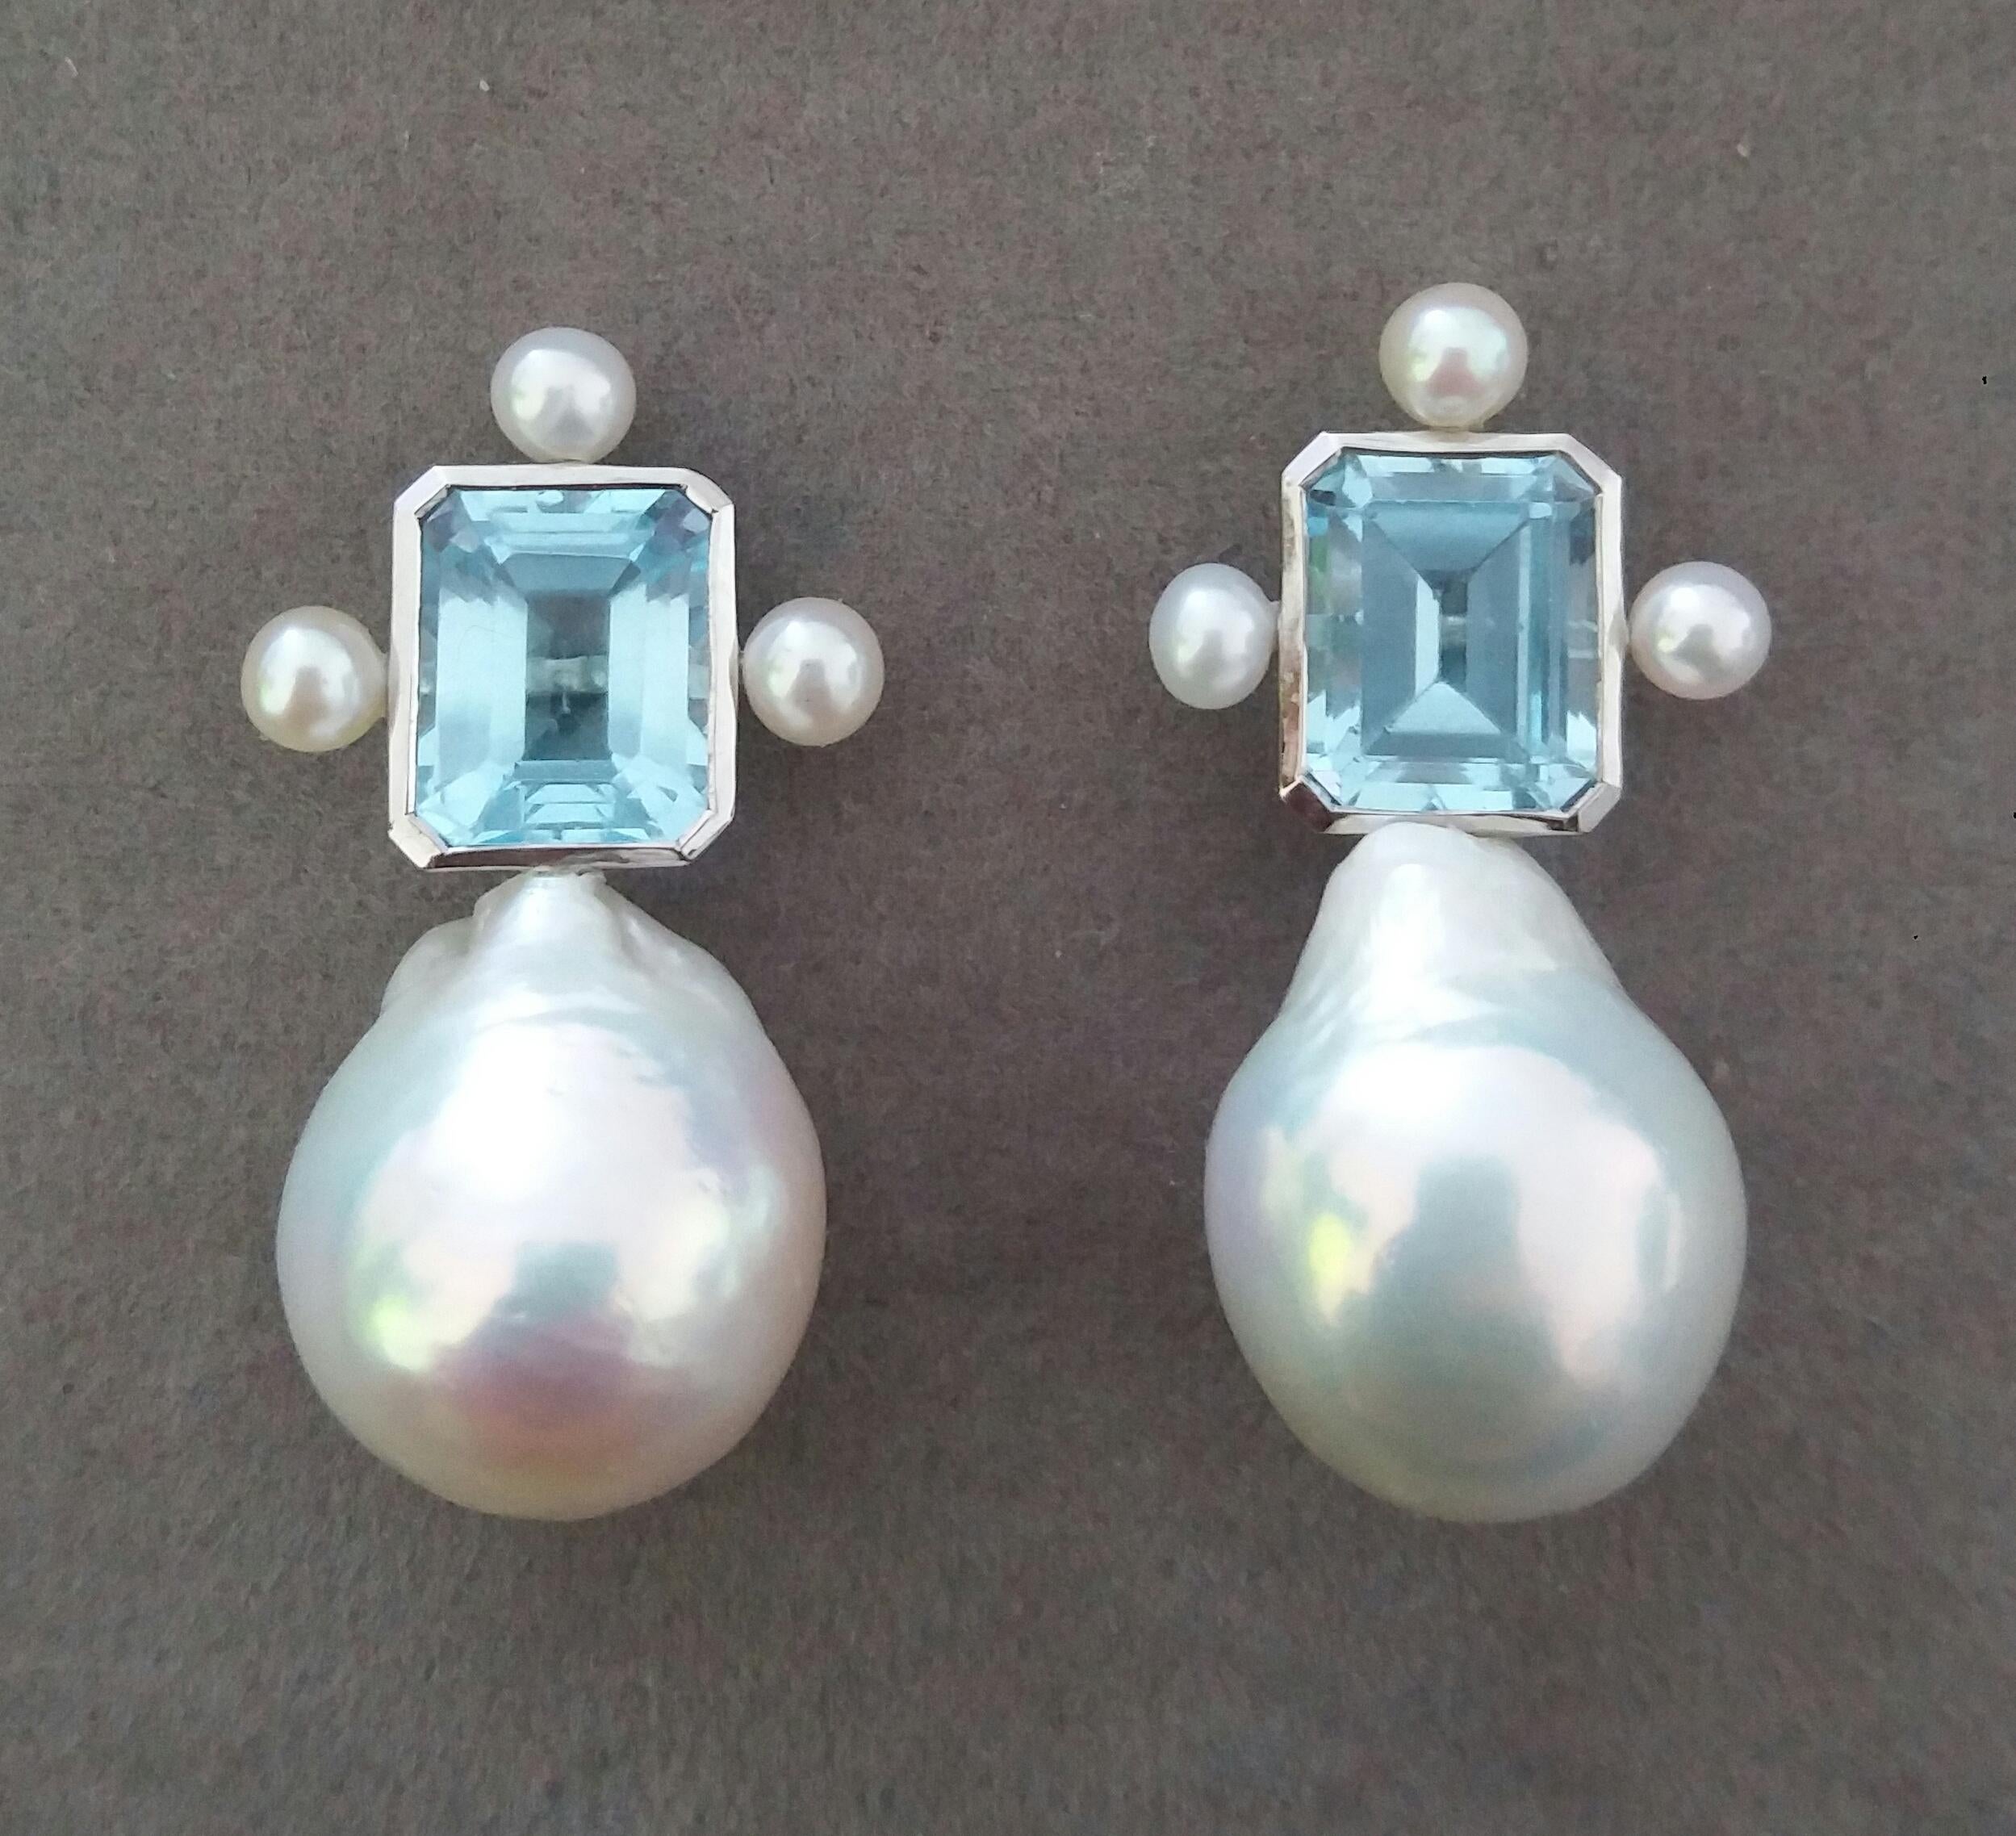 These elegant and handmade earrings have 2 Octagon Faceted Sky Blue Topaz measuring 9 x 11 mm set in a 14 Kt white gold bezel with 3 small round pearls of 4mm on 3 sides at the top to which are suspended 2 very good luster White Pear Shape Baroque